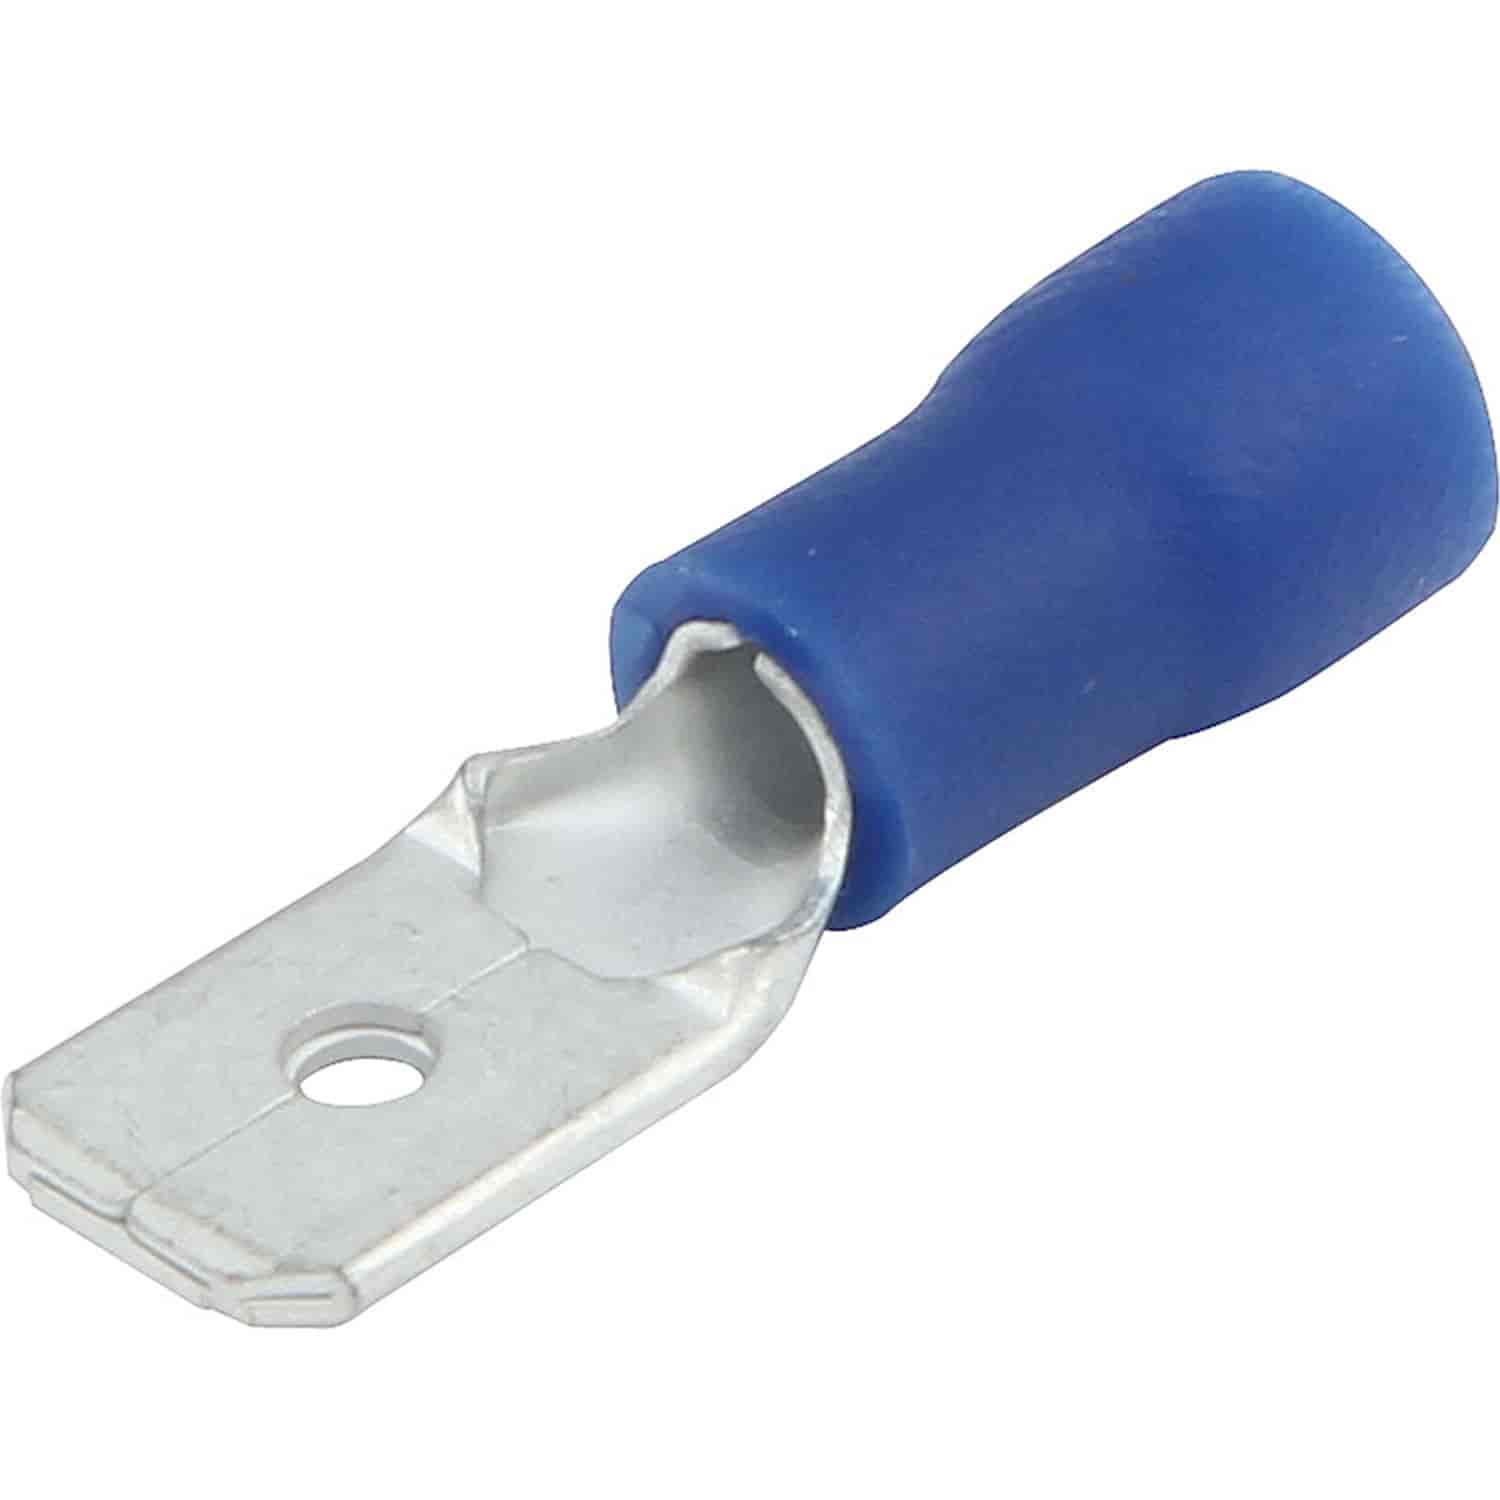 1/4" Male Blade Terminals Vinyl Insulated